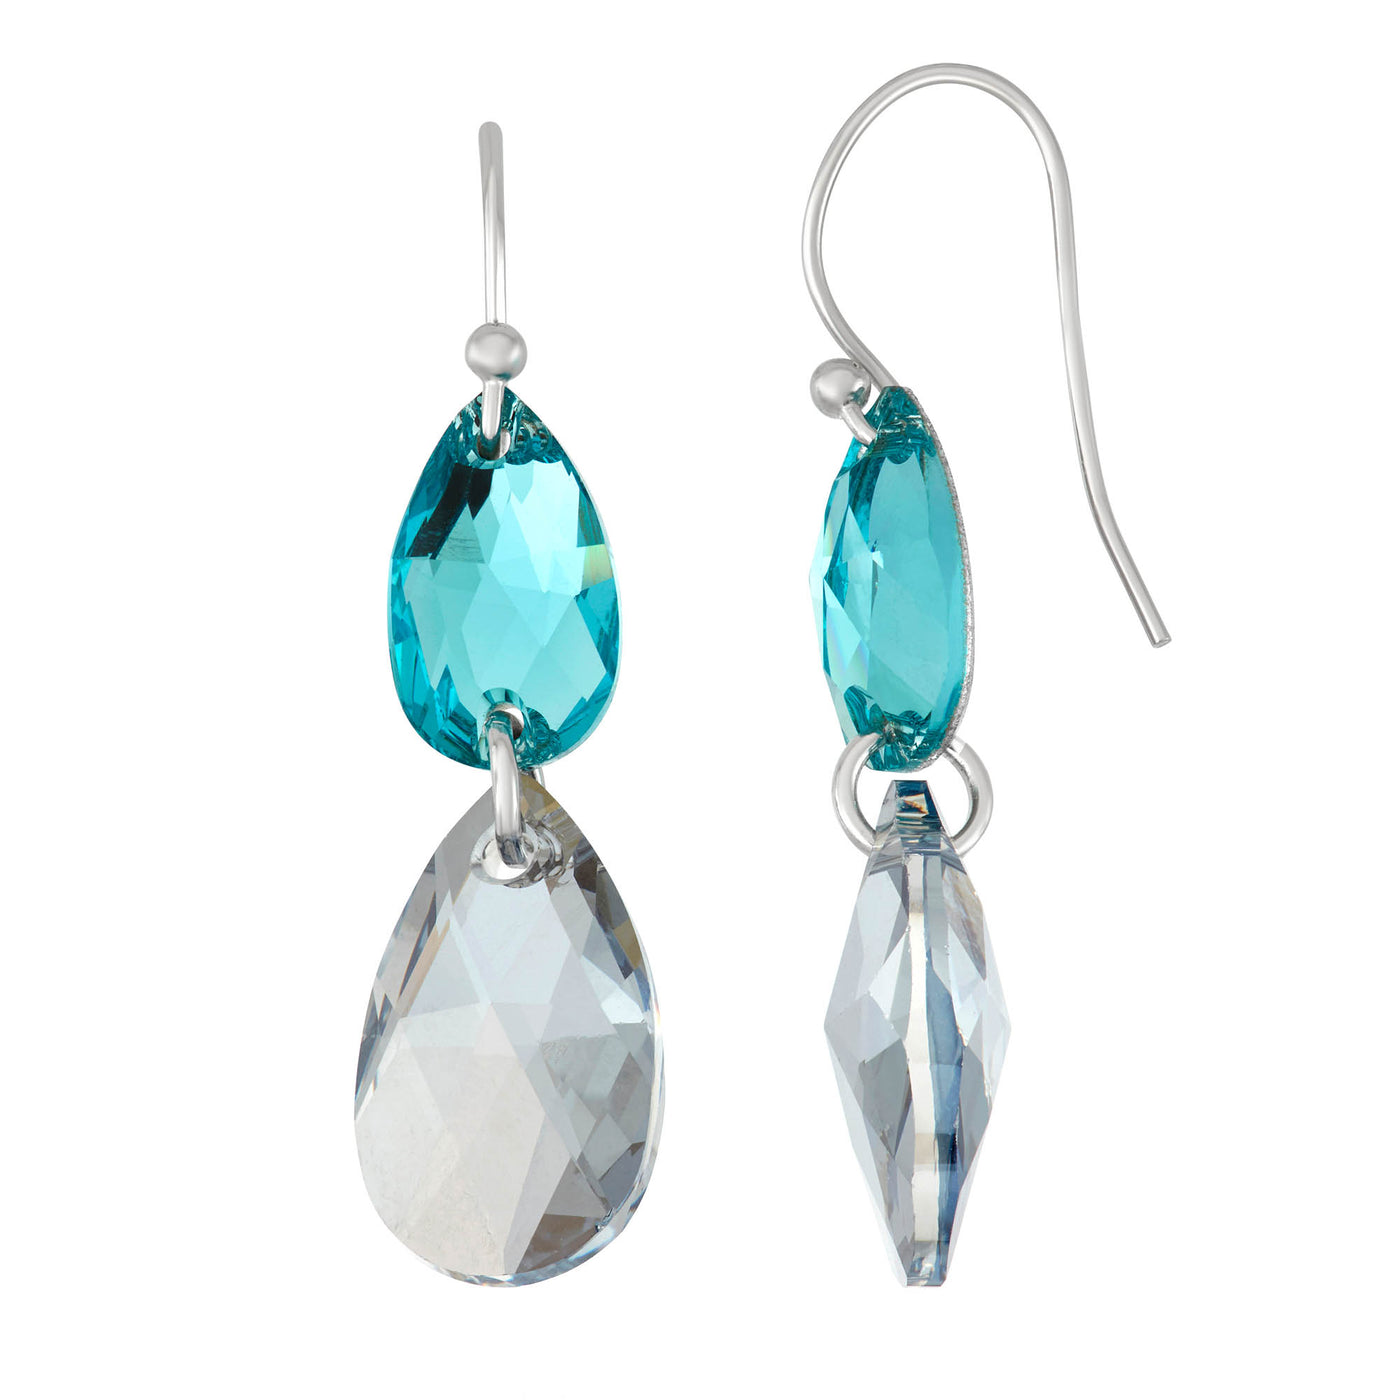 Rebecca Sloane Silver Duo Tear Drop Earring With Blue Crystals